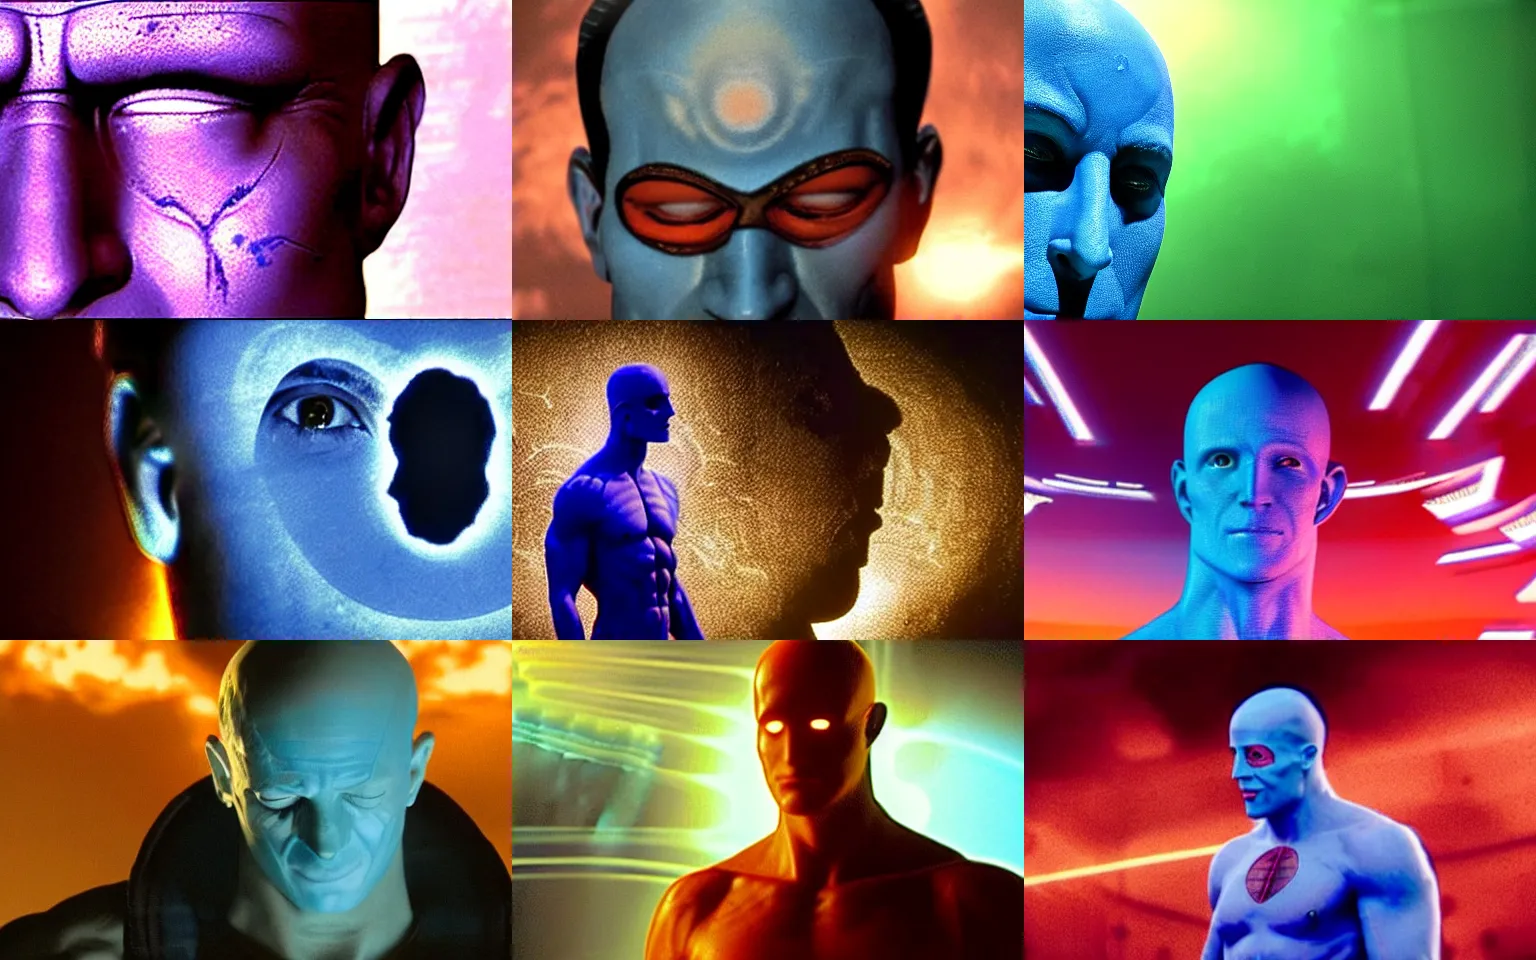 Prompt: still frame from zach snyder's film adaptation of watchmen showing a closeup of dr manhattan, his blue face in profile, showcasing impressive cgi with subsurface illumination effects.